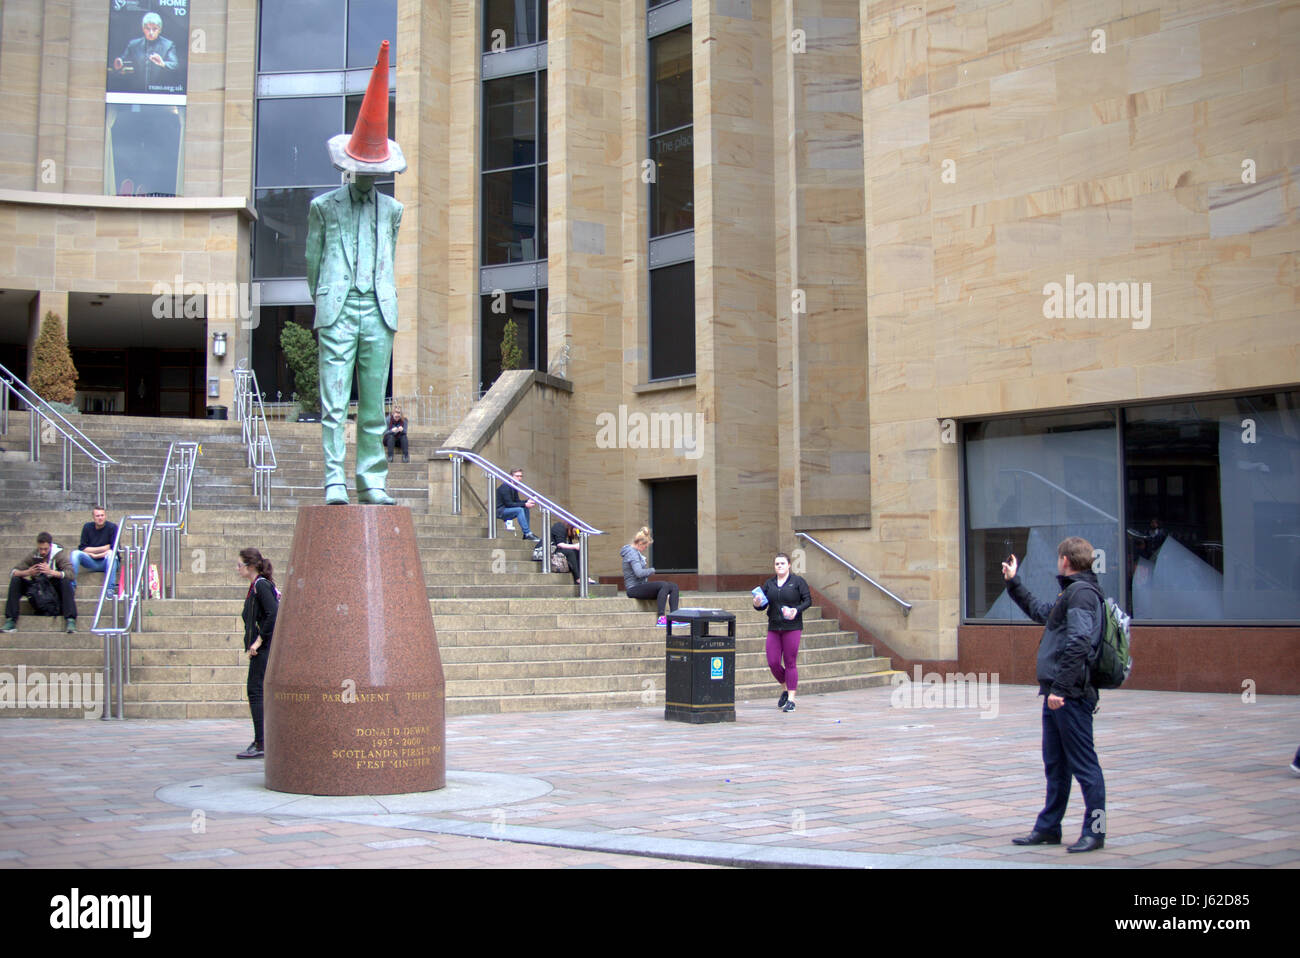 Glasgow, Scotland, UK. 19th May, 2017. Glaswegians celebrate election fever by elevating the Sauchiehall Street steps Labour’s Donald Dewar statue by placing a traffic cone on his  head  to the Iconic status of the city’s cone head man  that is outside of the Museum of Modern Art Credit: gerard ferry/Alamy Live News Stock Photo